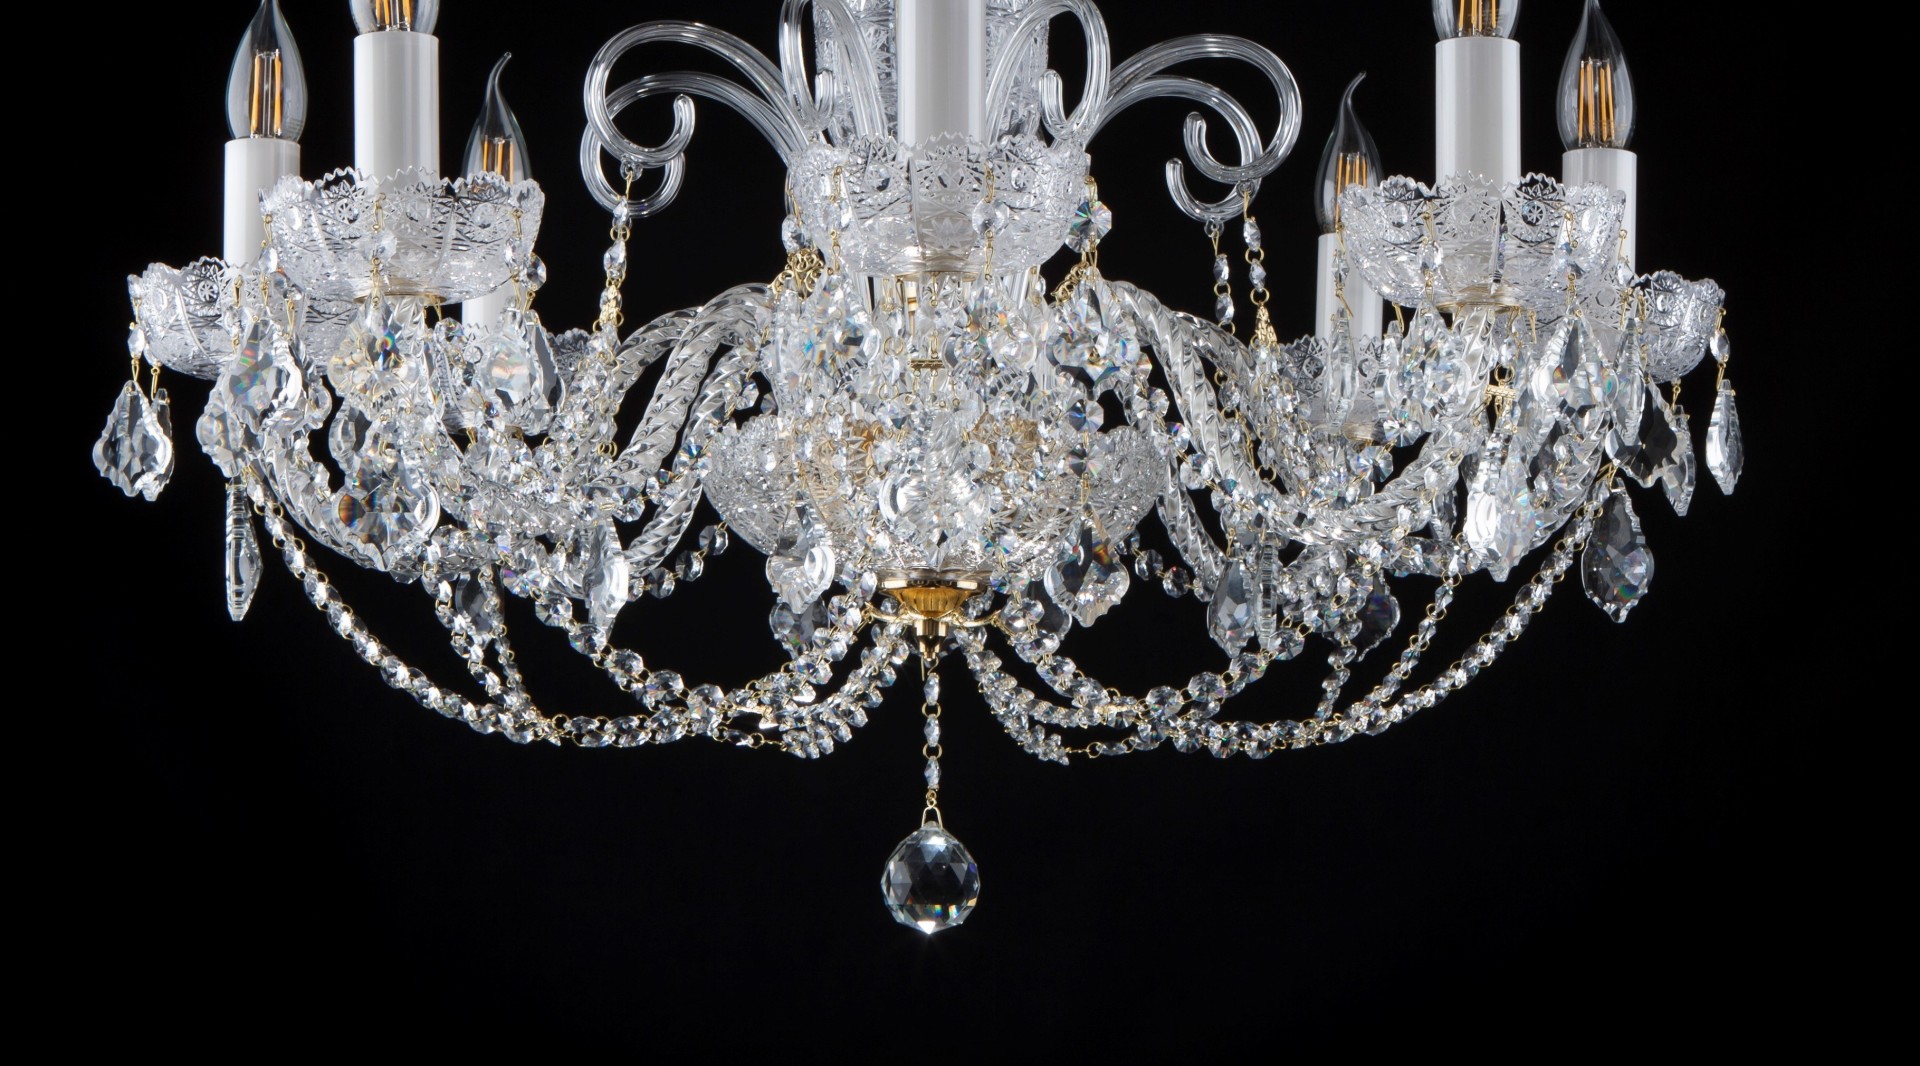 8 Arm Full Cut Crystal Chandelier In, How To Lower Chandelier